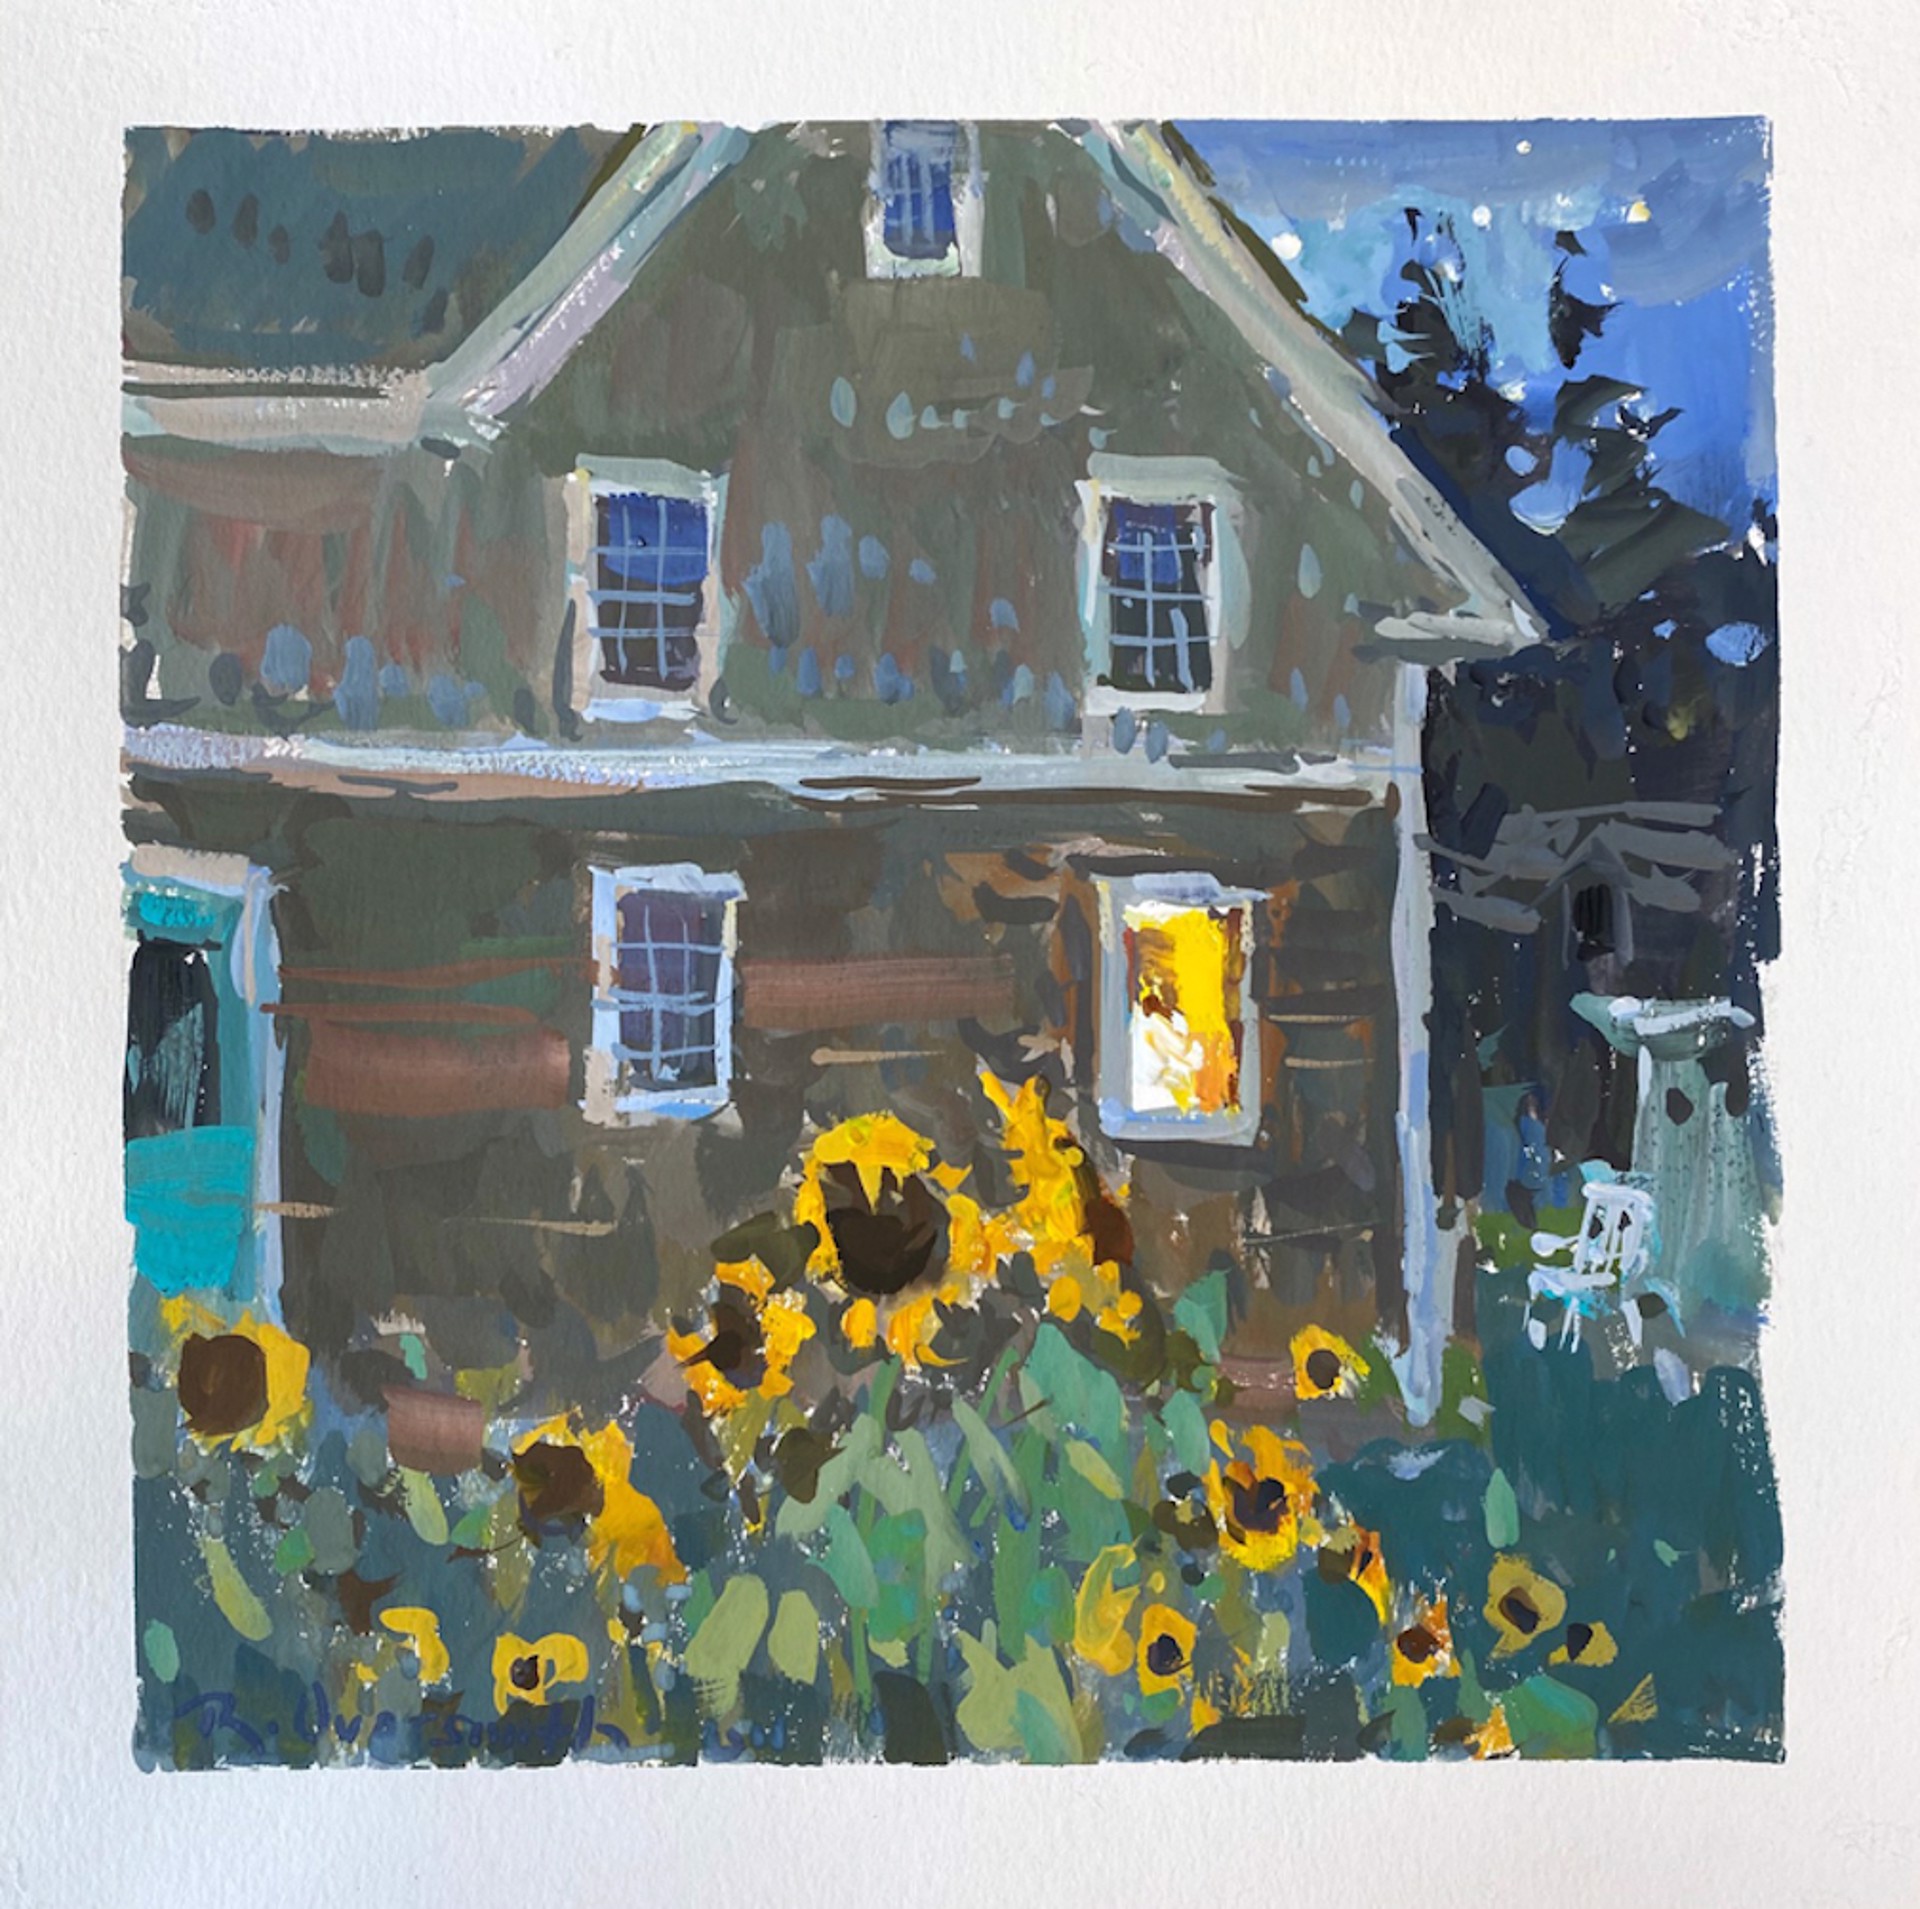 Stars and Sunflowers by Richard Oversmith